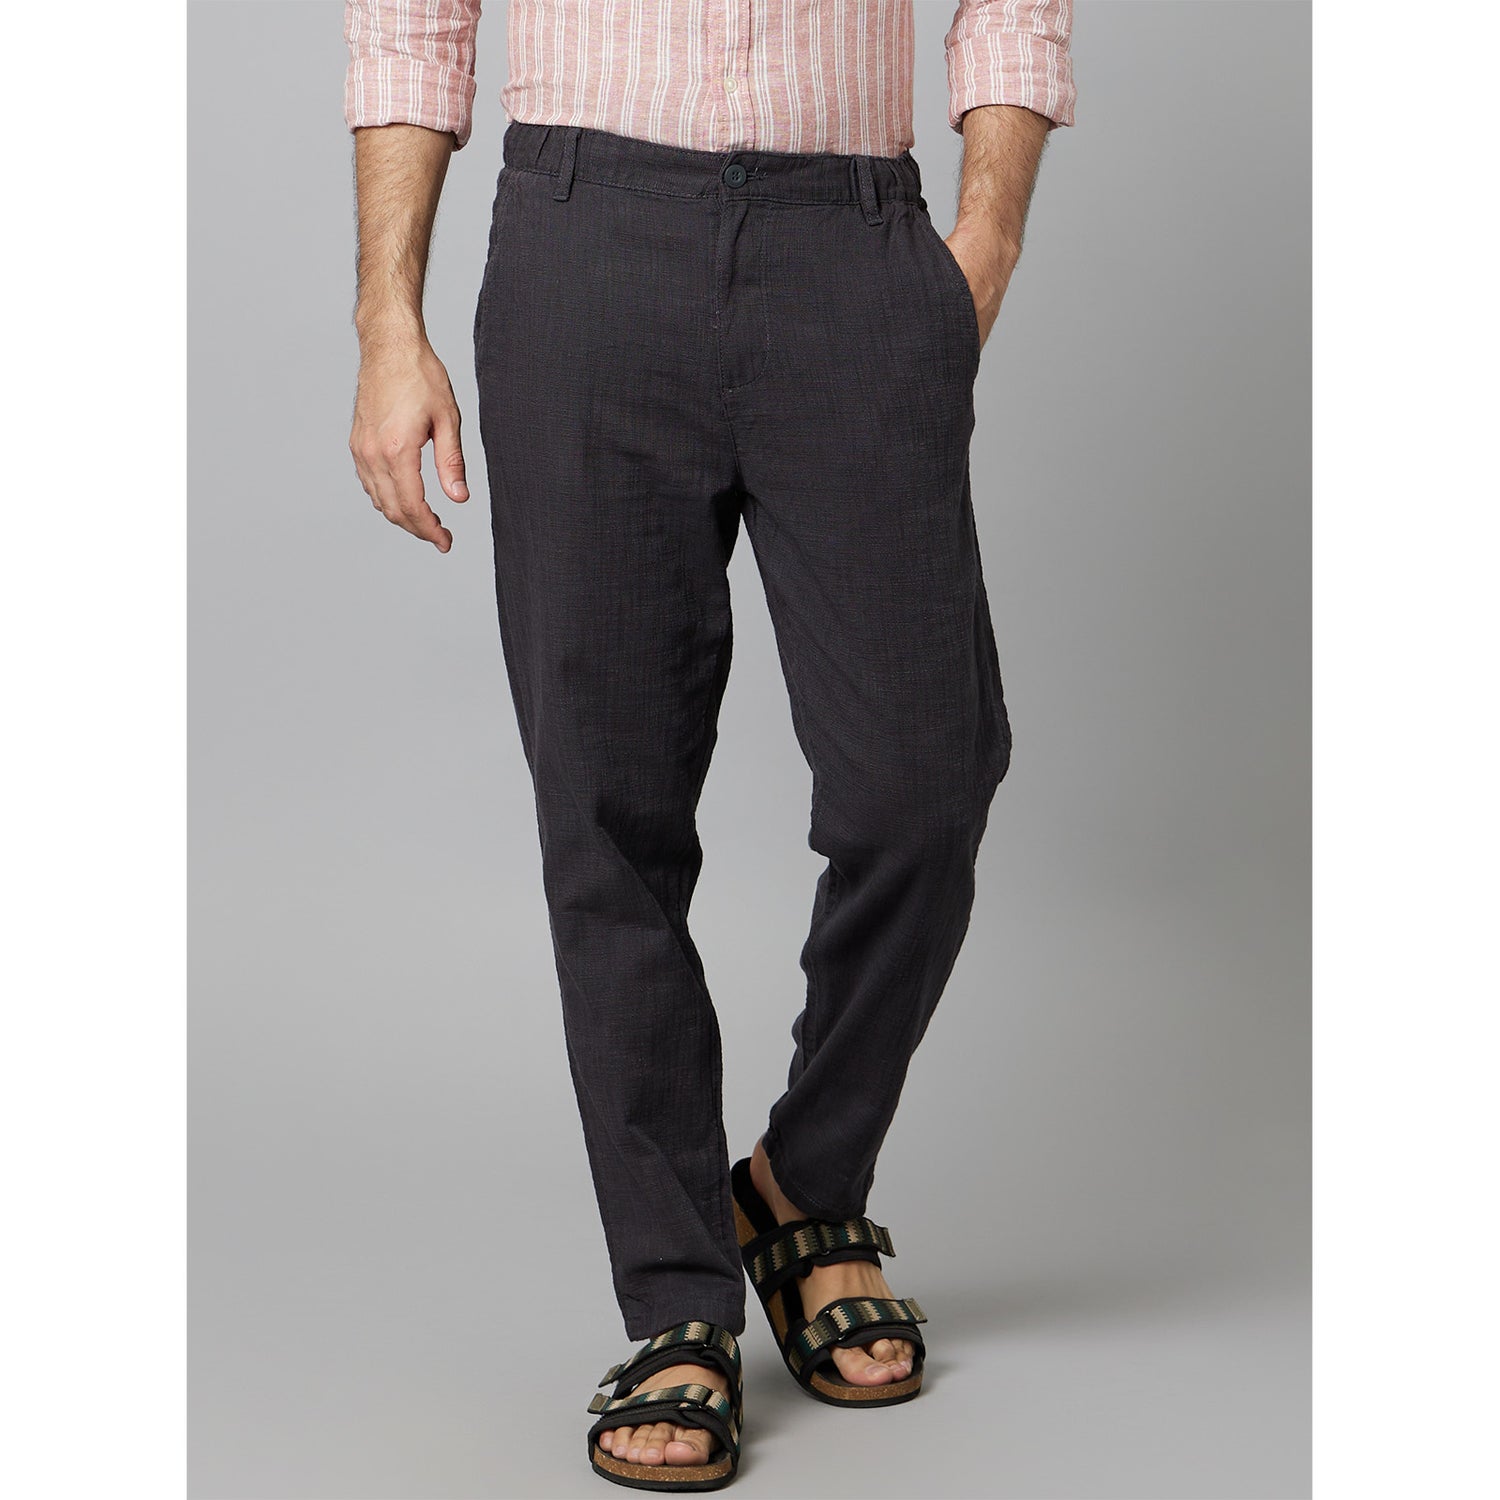 Mens Charcoal-Grey Solid 24 Hr Pant (Various Sizes)